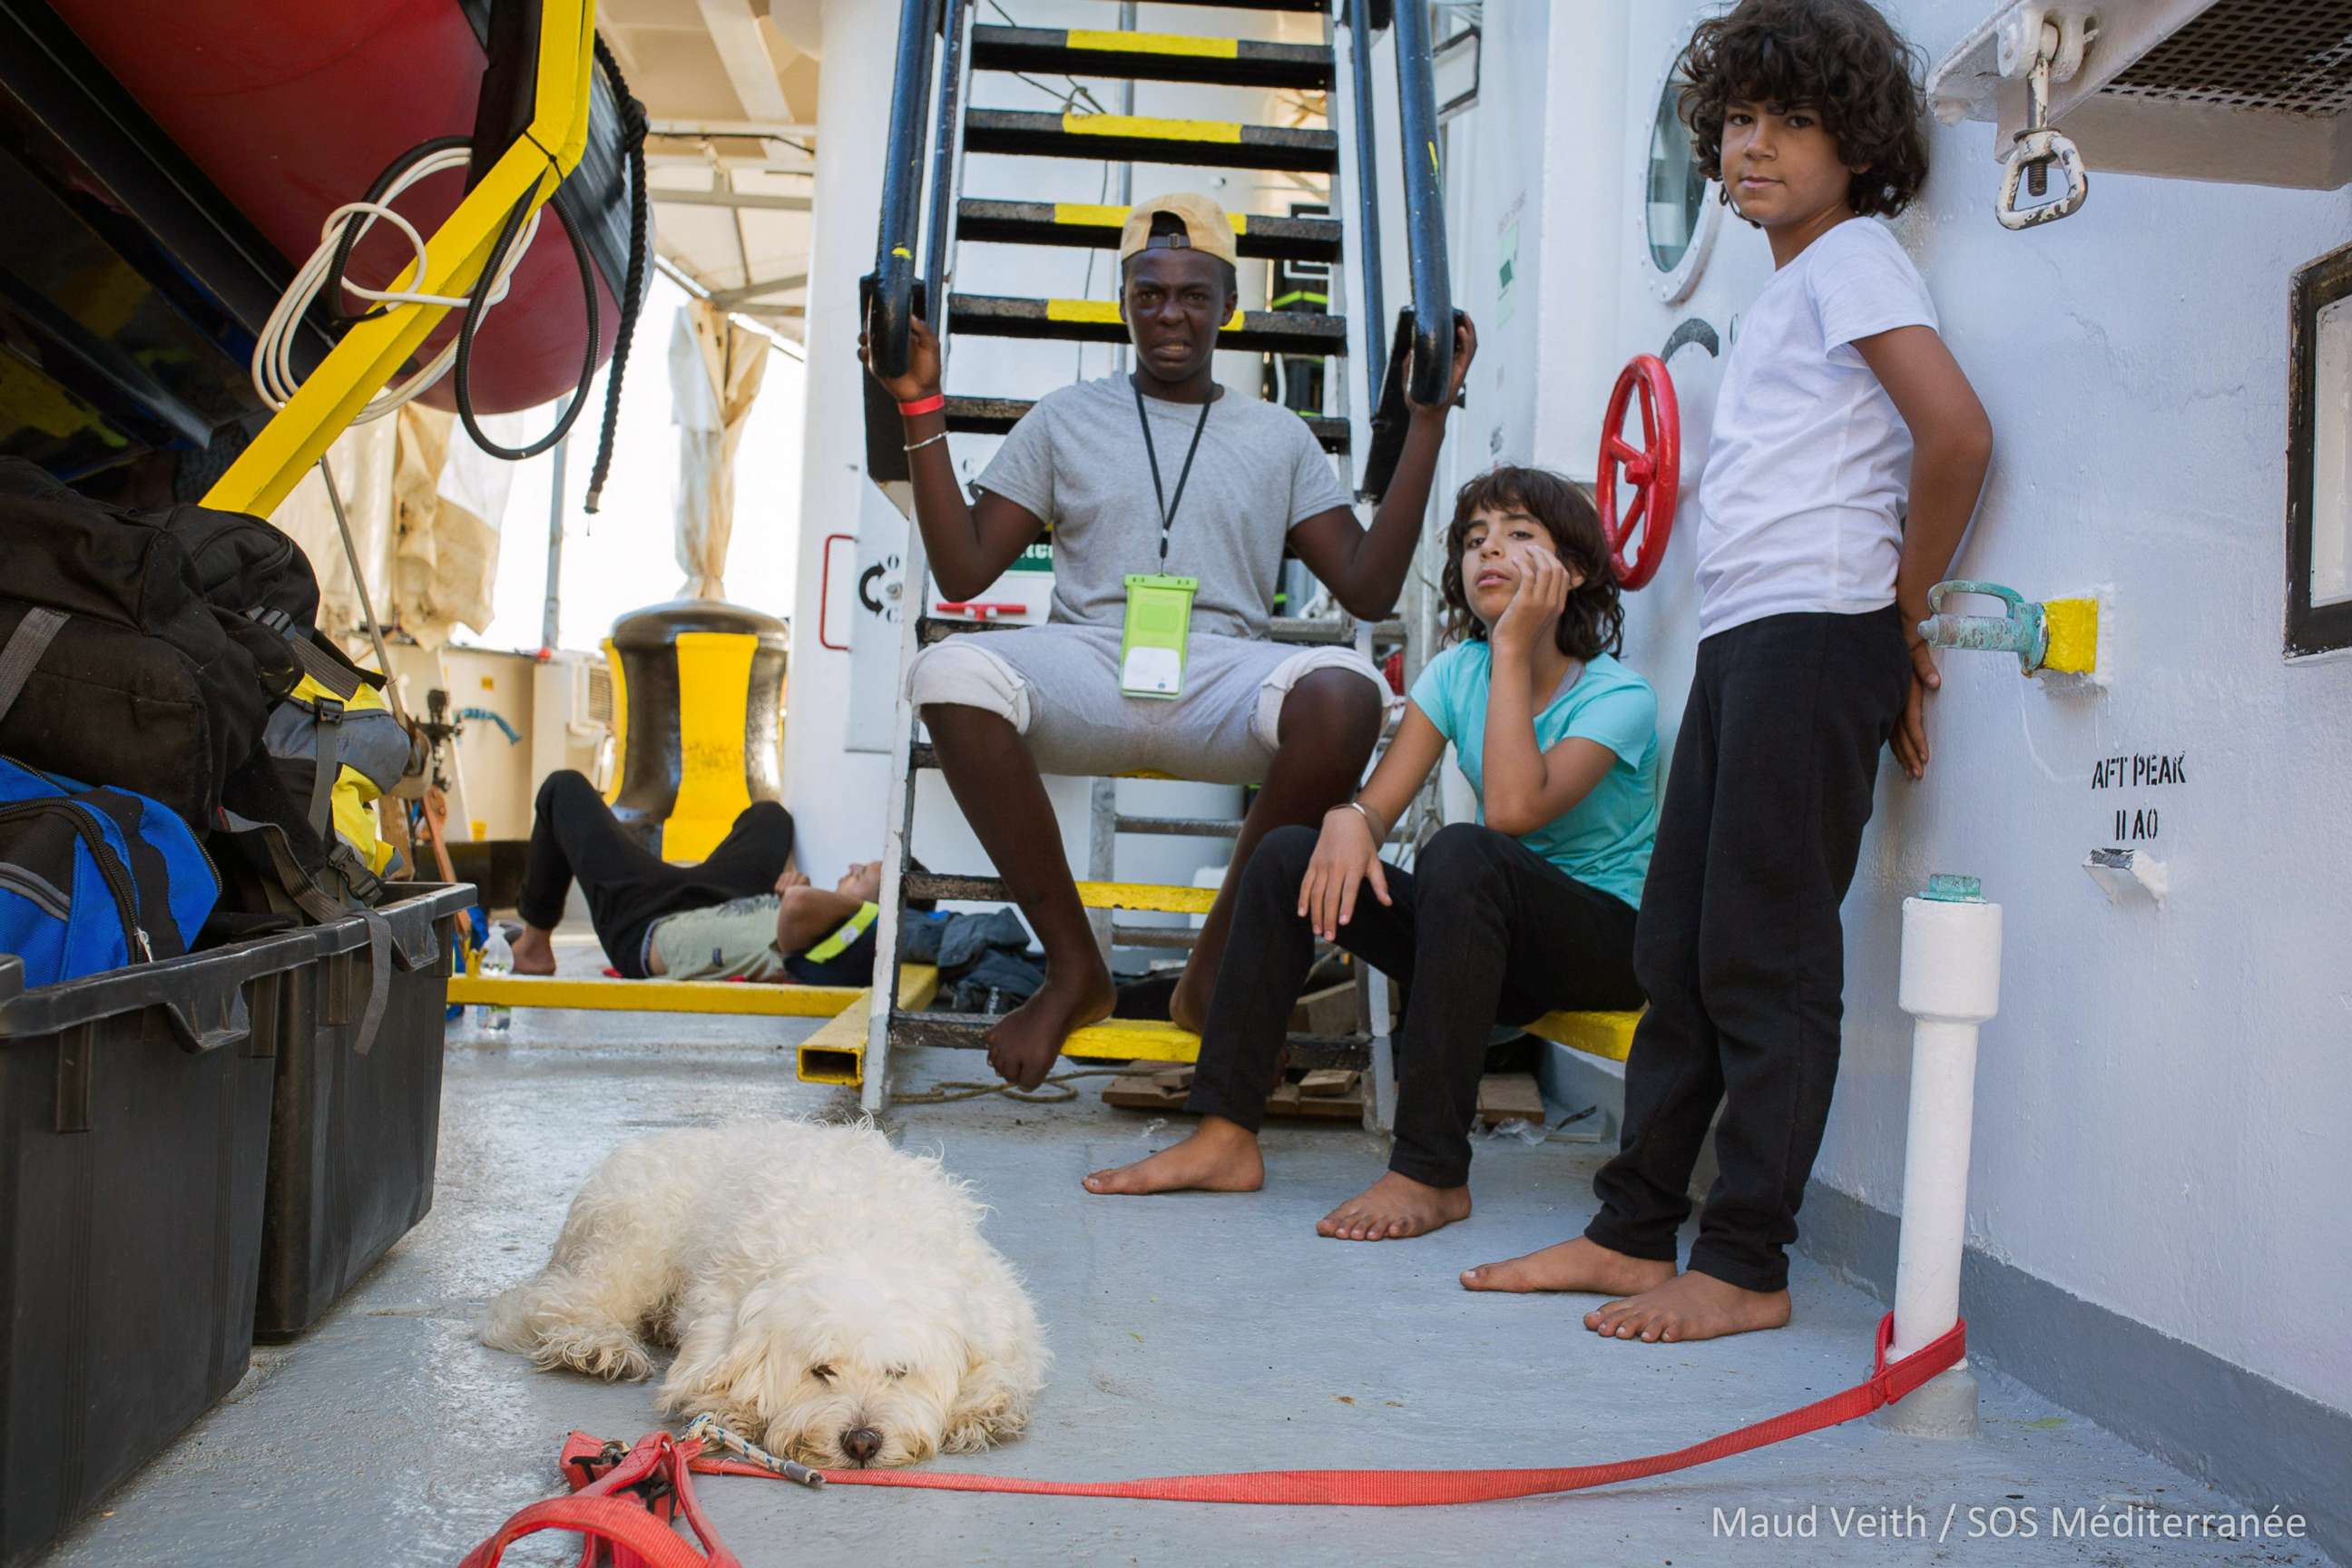 A photo released on Sept. 25, 2018 shows a rescued migrant at the Aquarius rescue ship run by non-governmental organizations "SOS Mediterranee" and "Medecins Sans Frontieres" in the search and rescue zone off the coast of Libya, in the Mediterranean Sea.